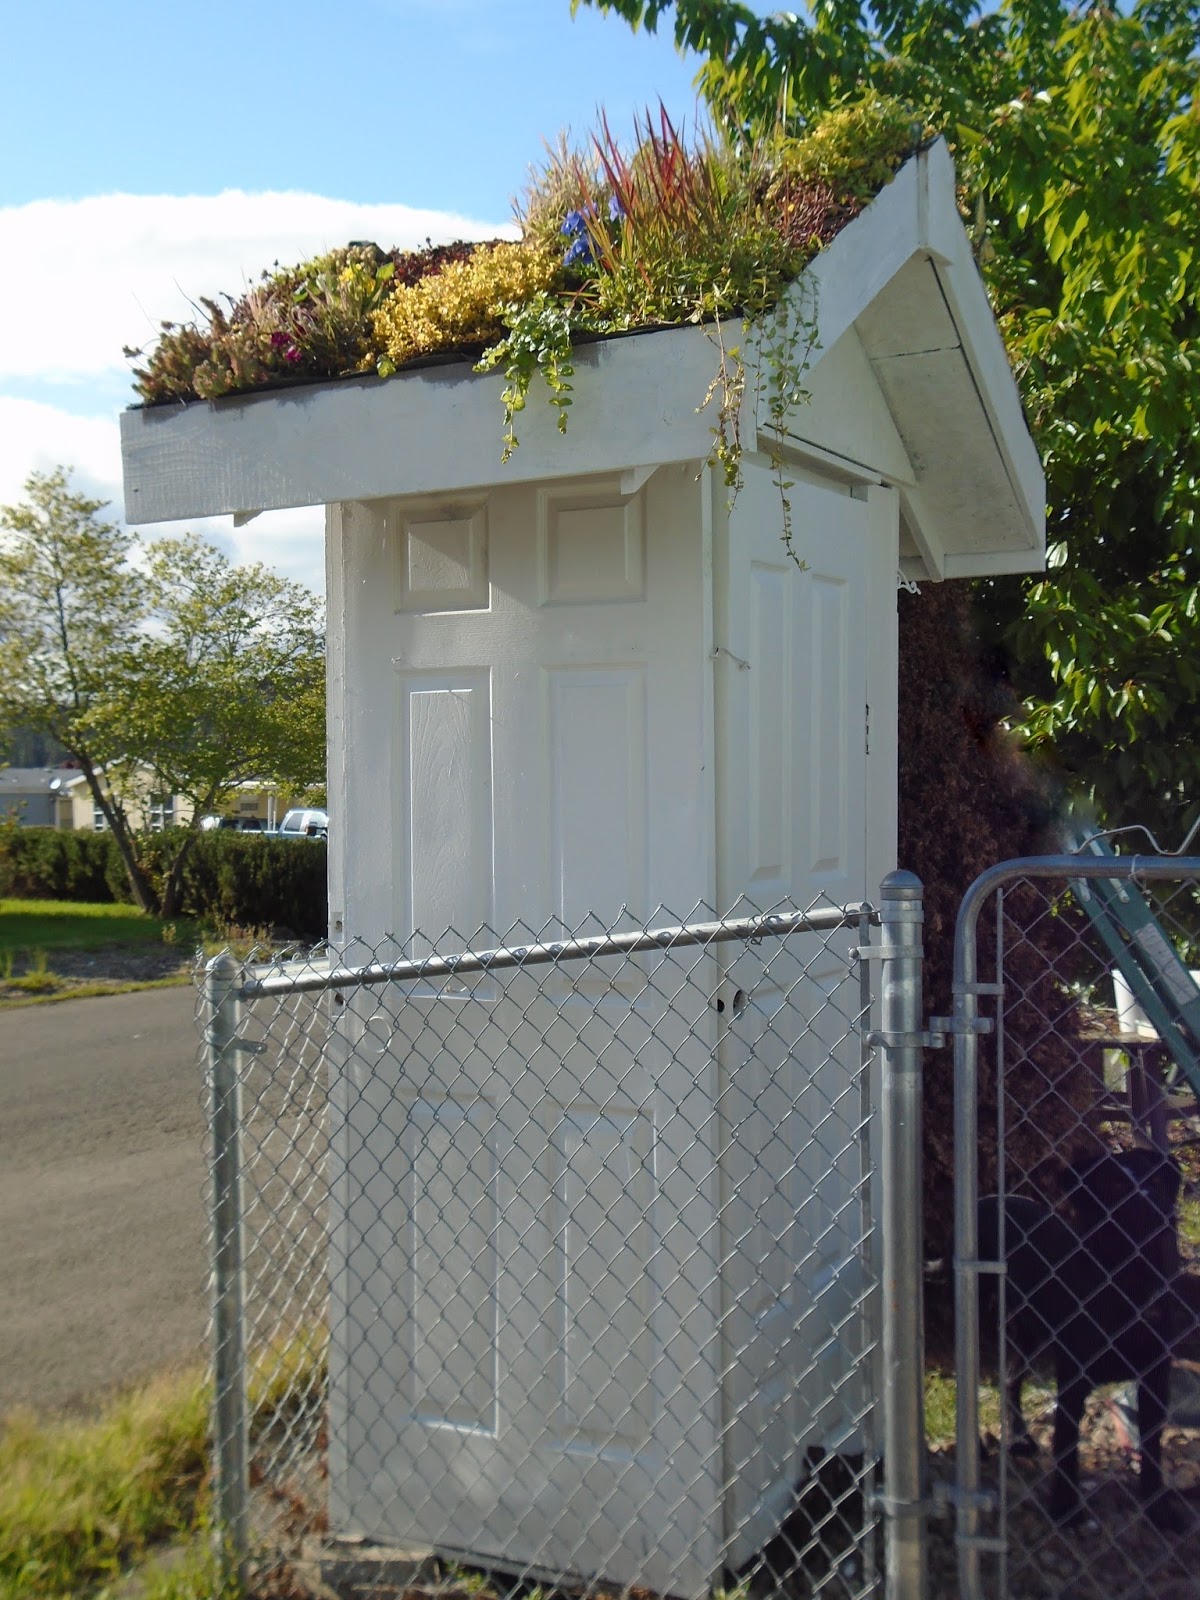 Make The Best of Things: A Living Plant Roof On Our Shed